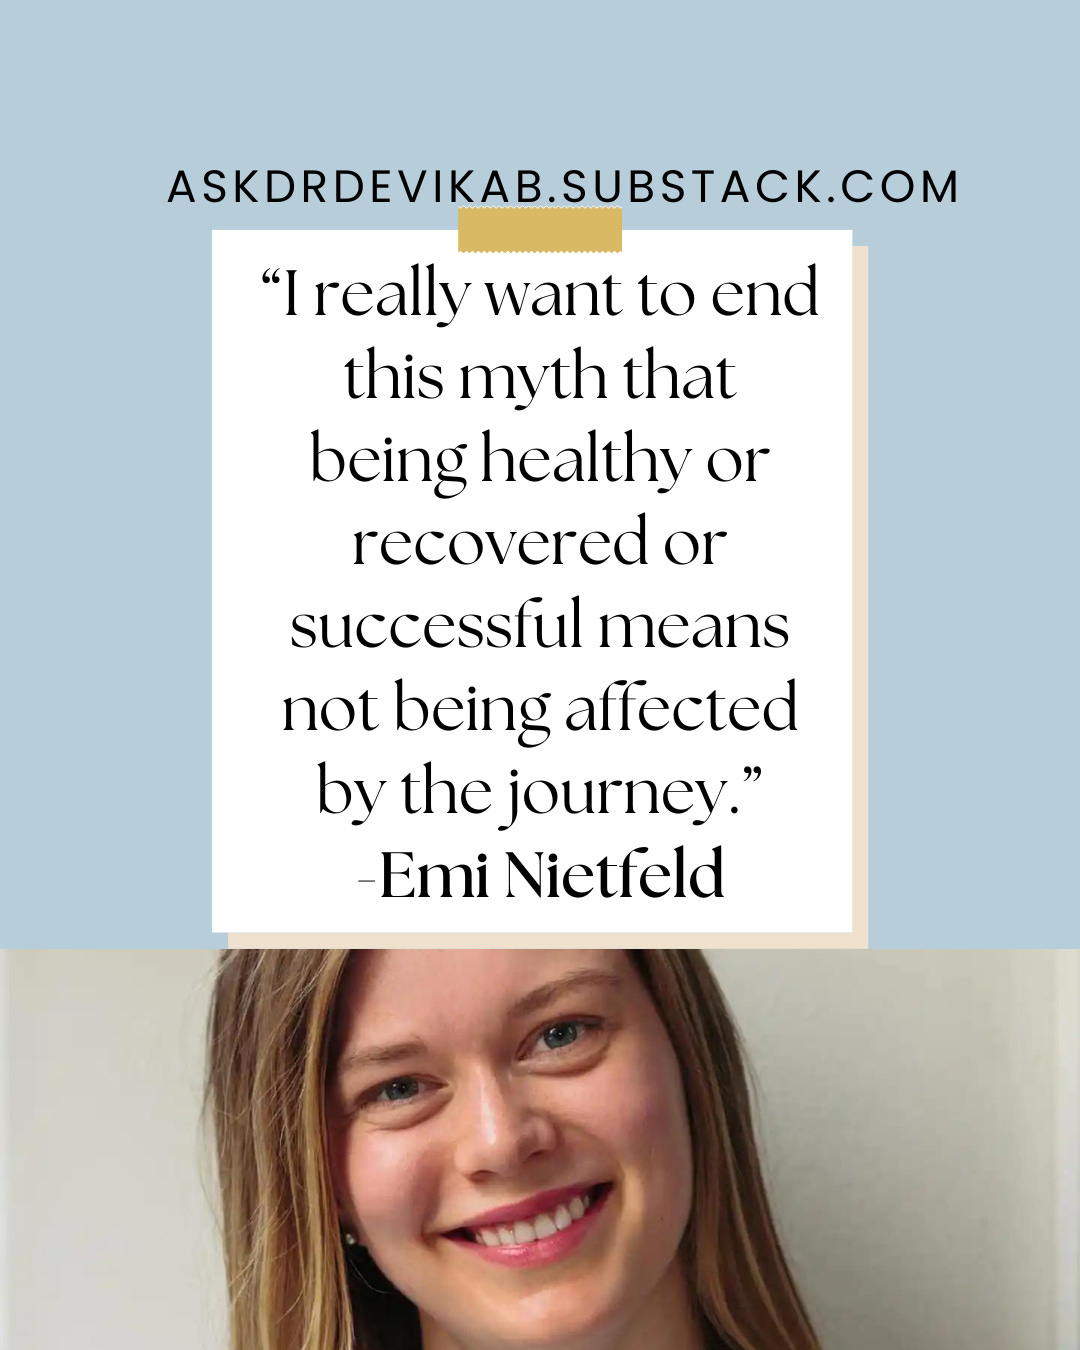 Photo of Emi with the quote: "I really want to end this myth that being healthy or recovered or successful means not being affected by the journey."